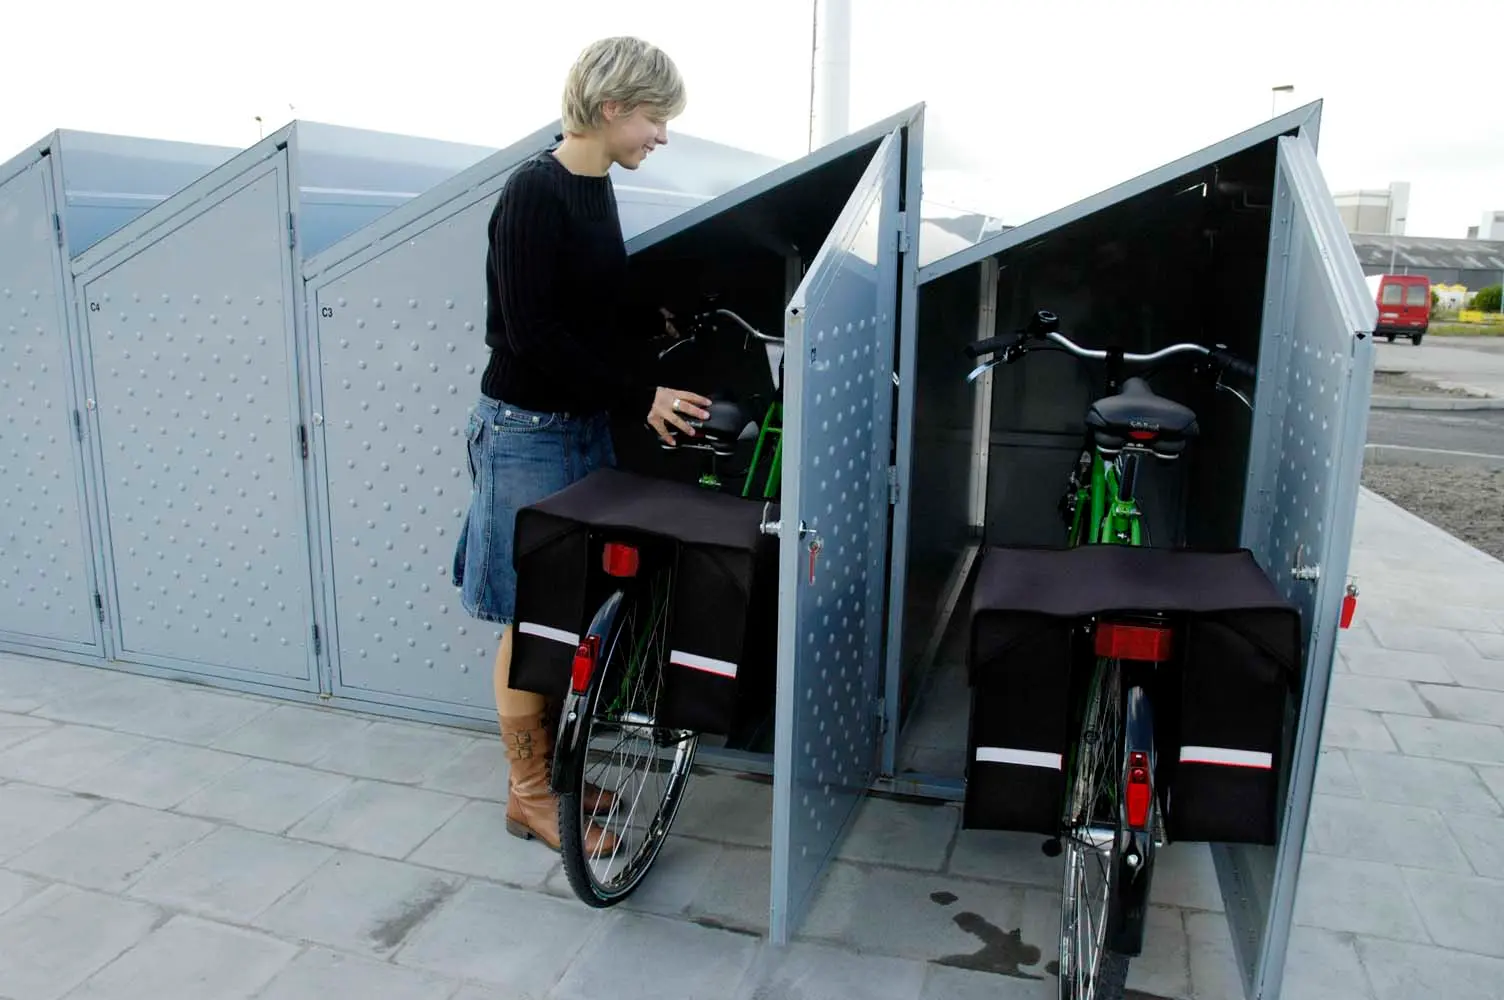 Bike lockers used to store bicycles for an extended period.